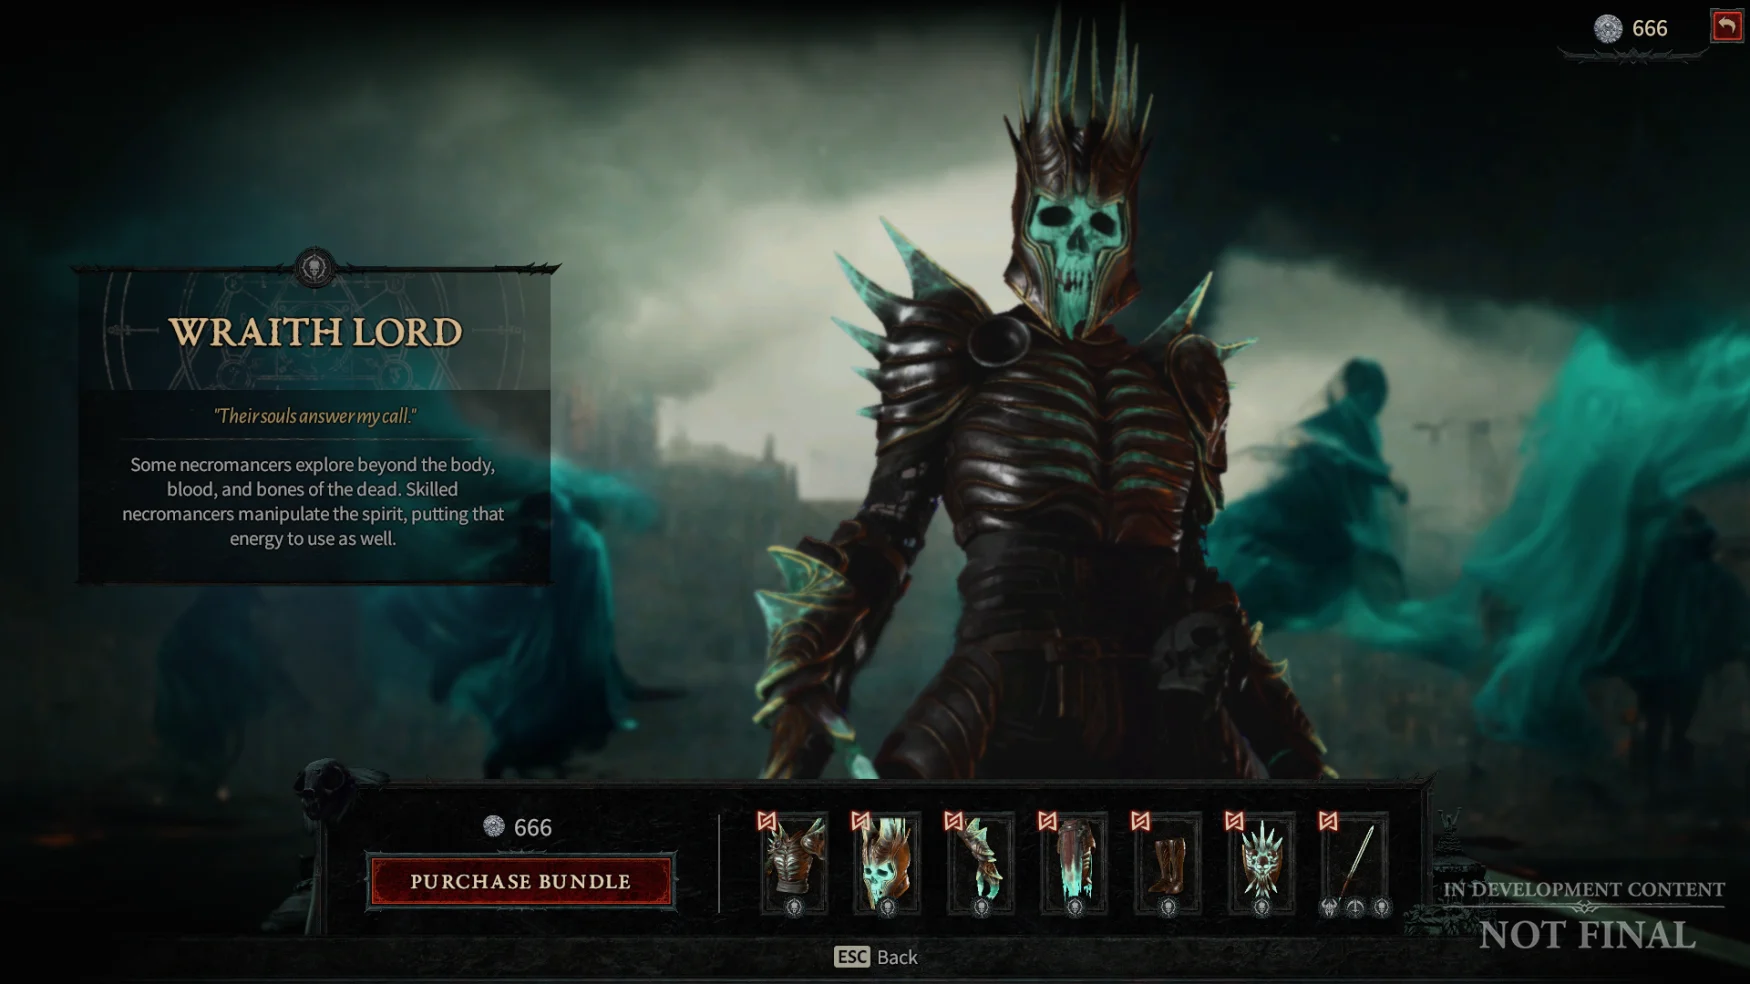 Screenshot showing off the Diablo IV in-game where players can purchase cosmetics for their characters.